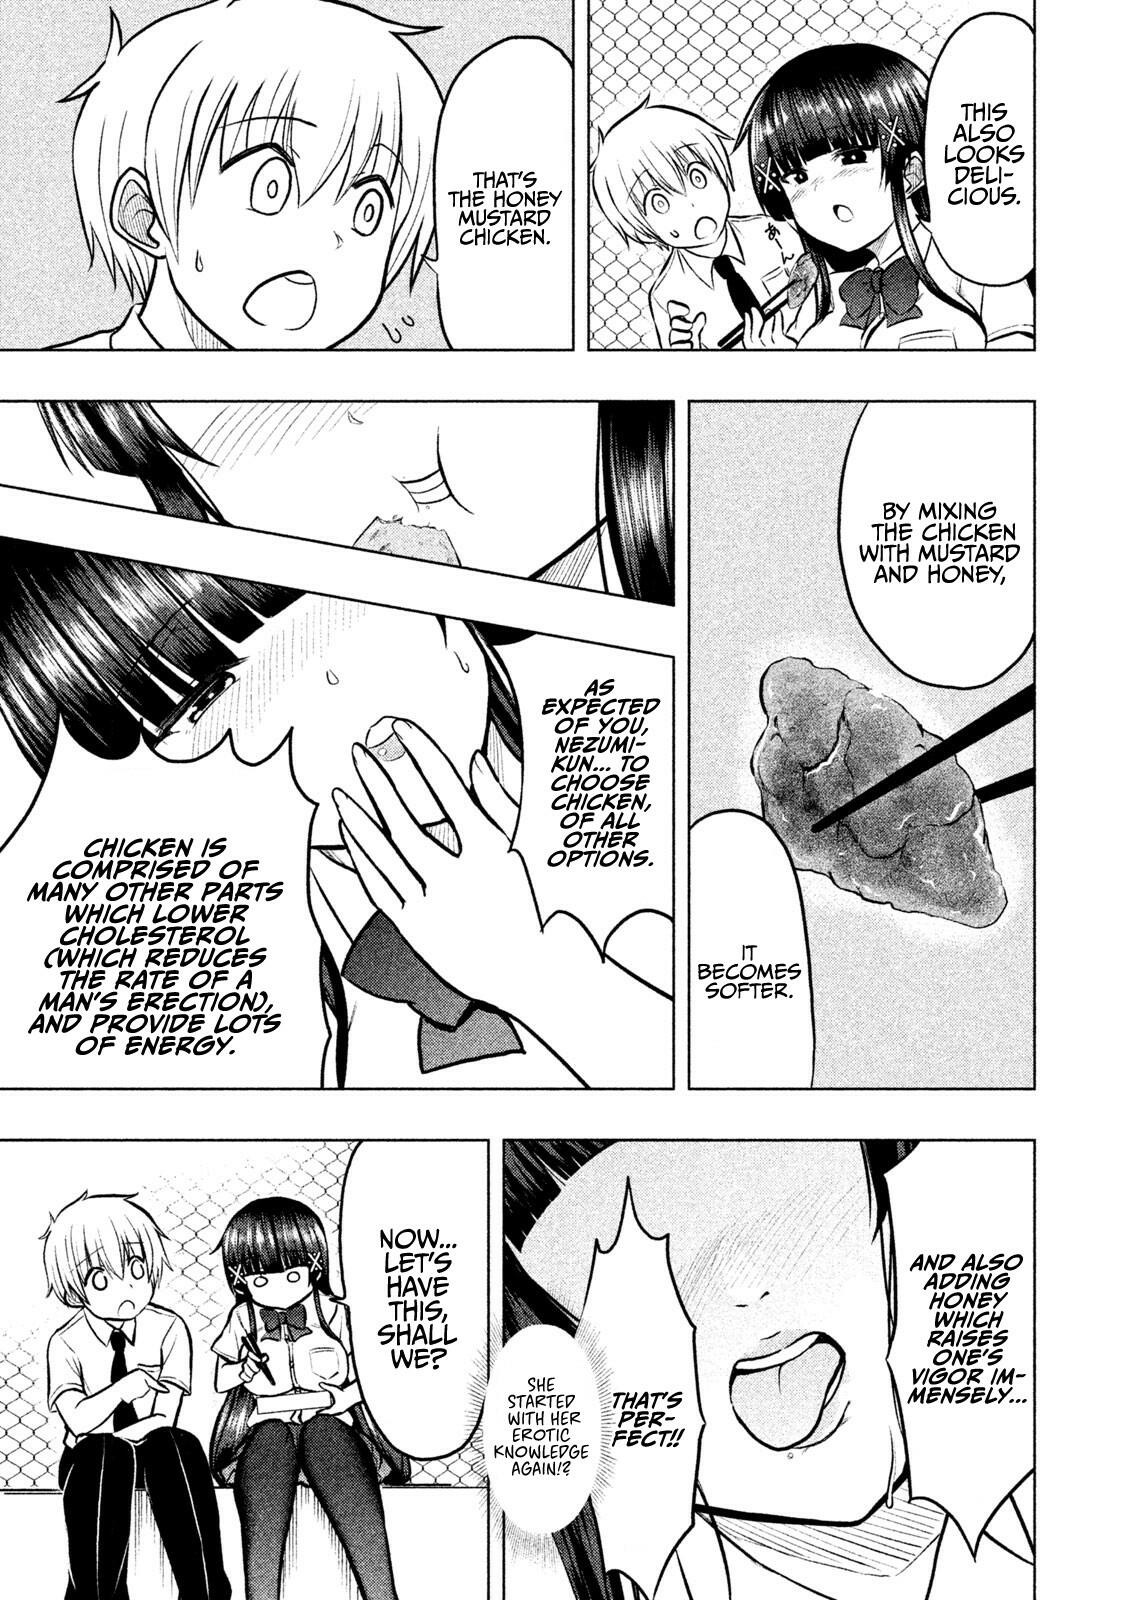 A Girl Who Is Very Well-Informed About Weird Knowledge, Takayukashiki Souko-San Chapter 21: Lunch Box page 6 - Mangakakalots.com